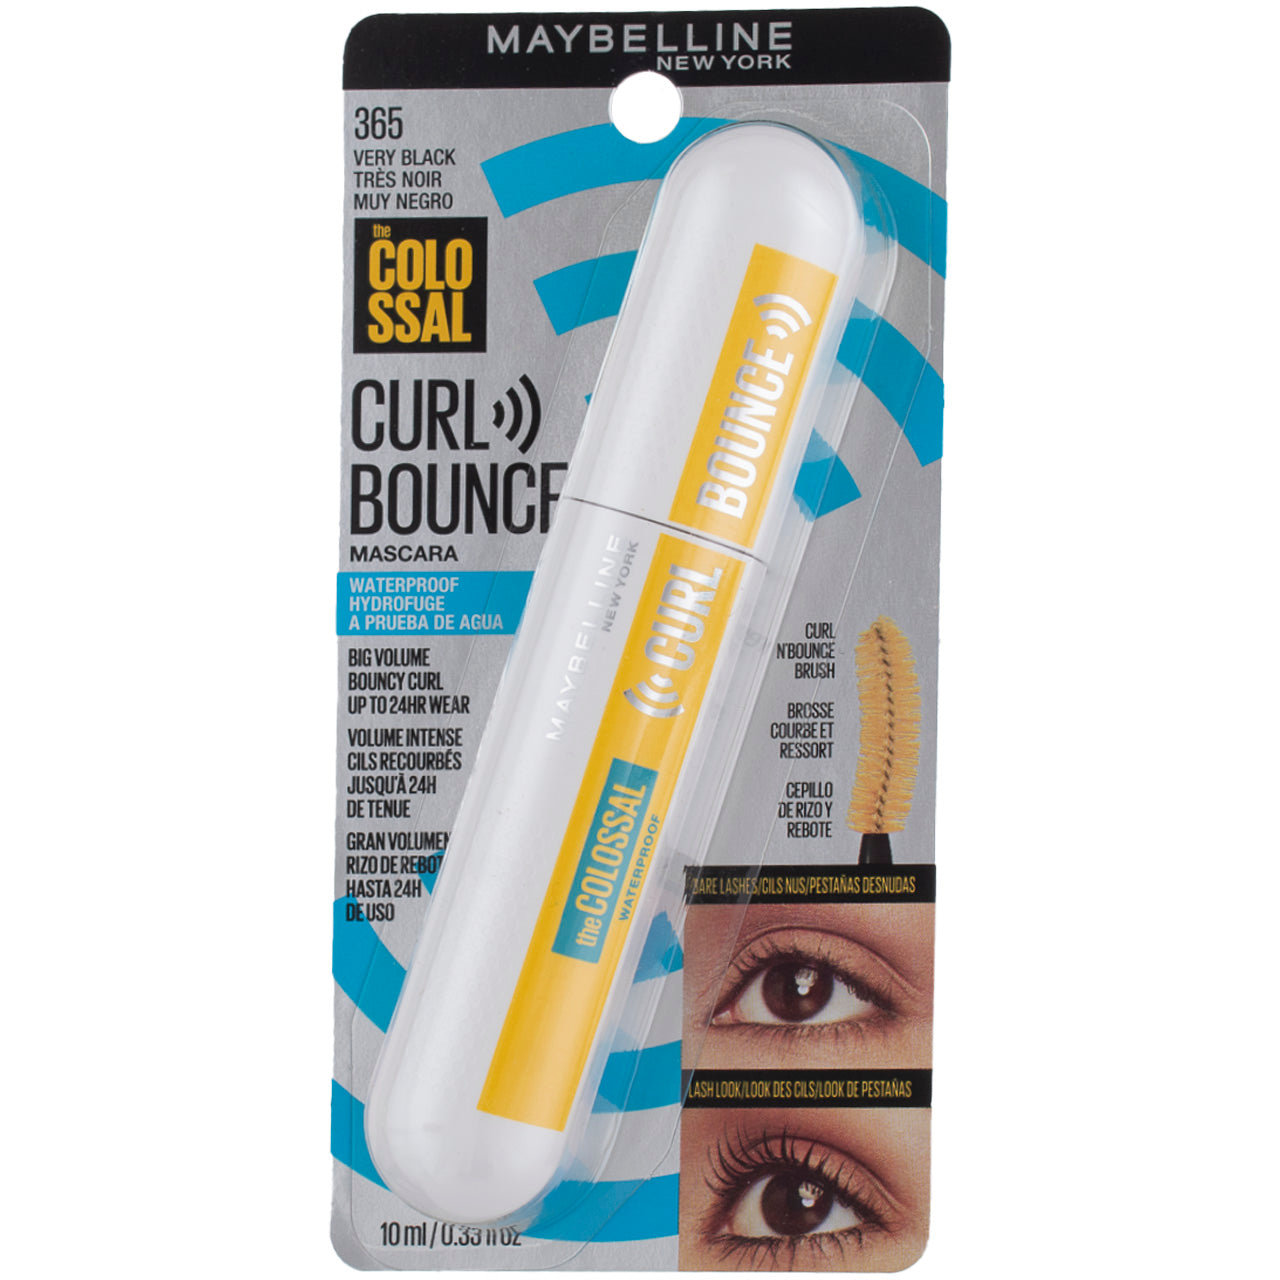 Vitabox Bouncing 0.33 Colossal The fl Maybelline Mascara, Black – 365, Very Curl